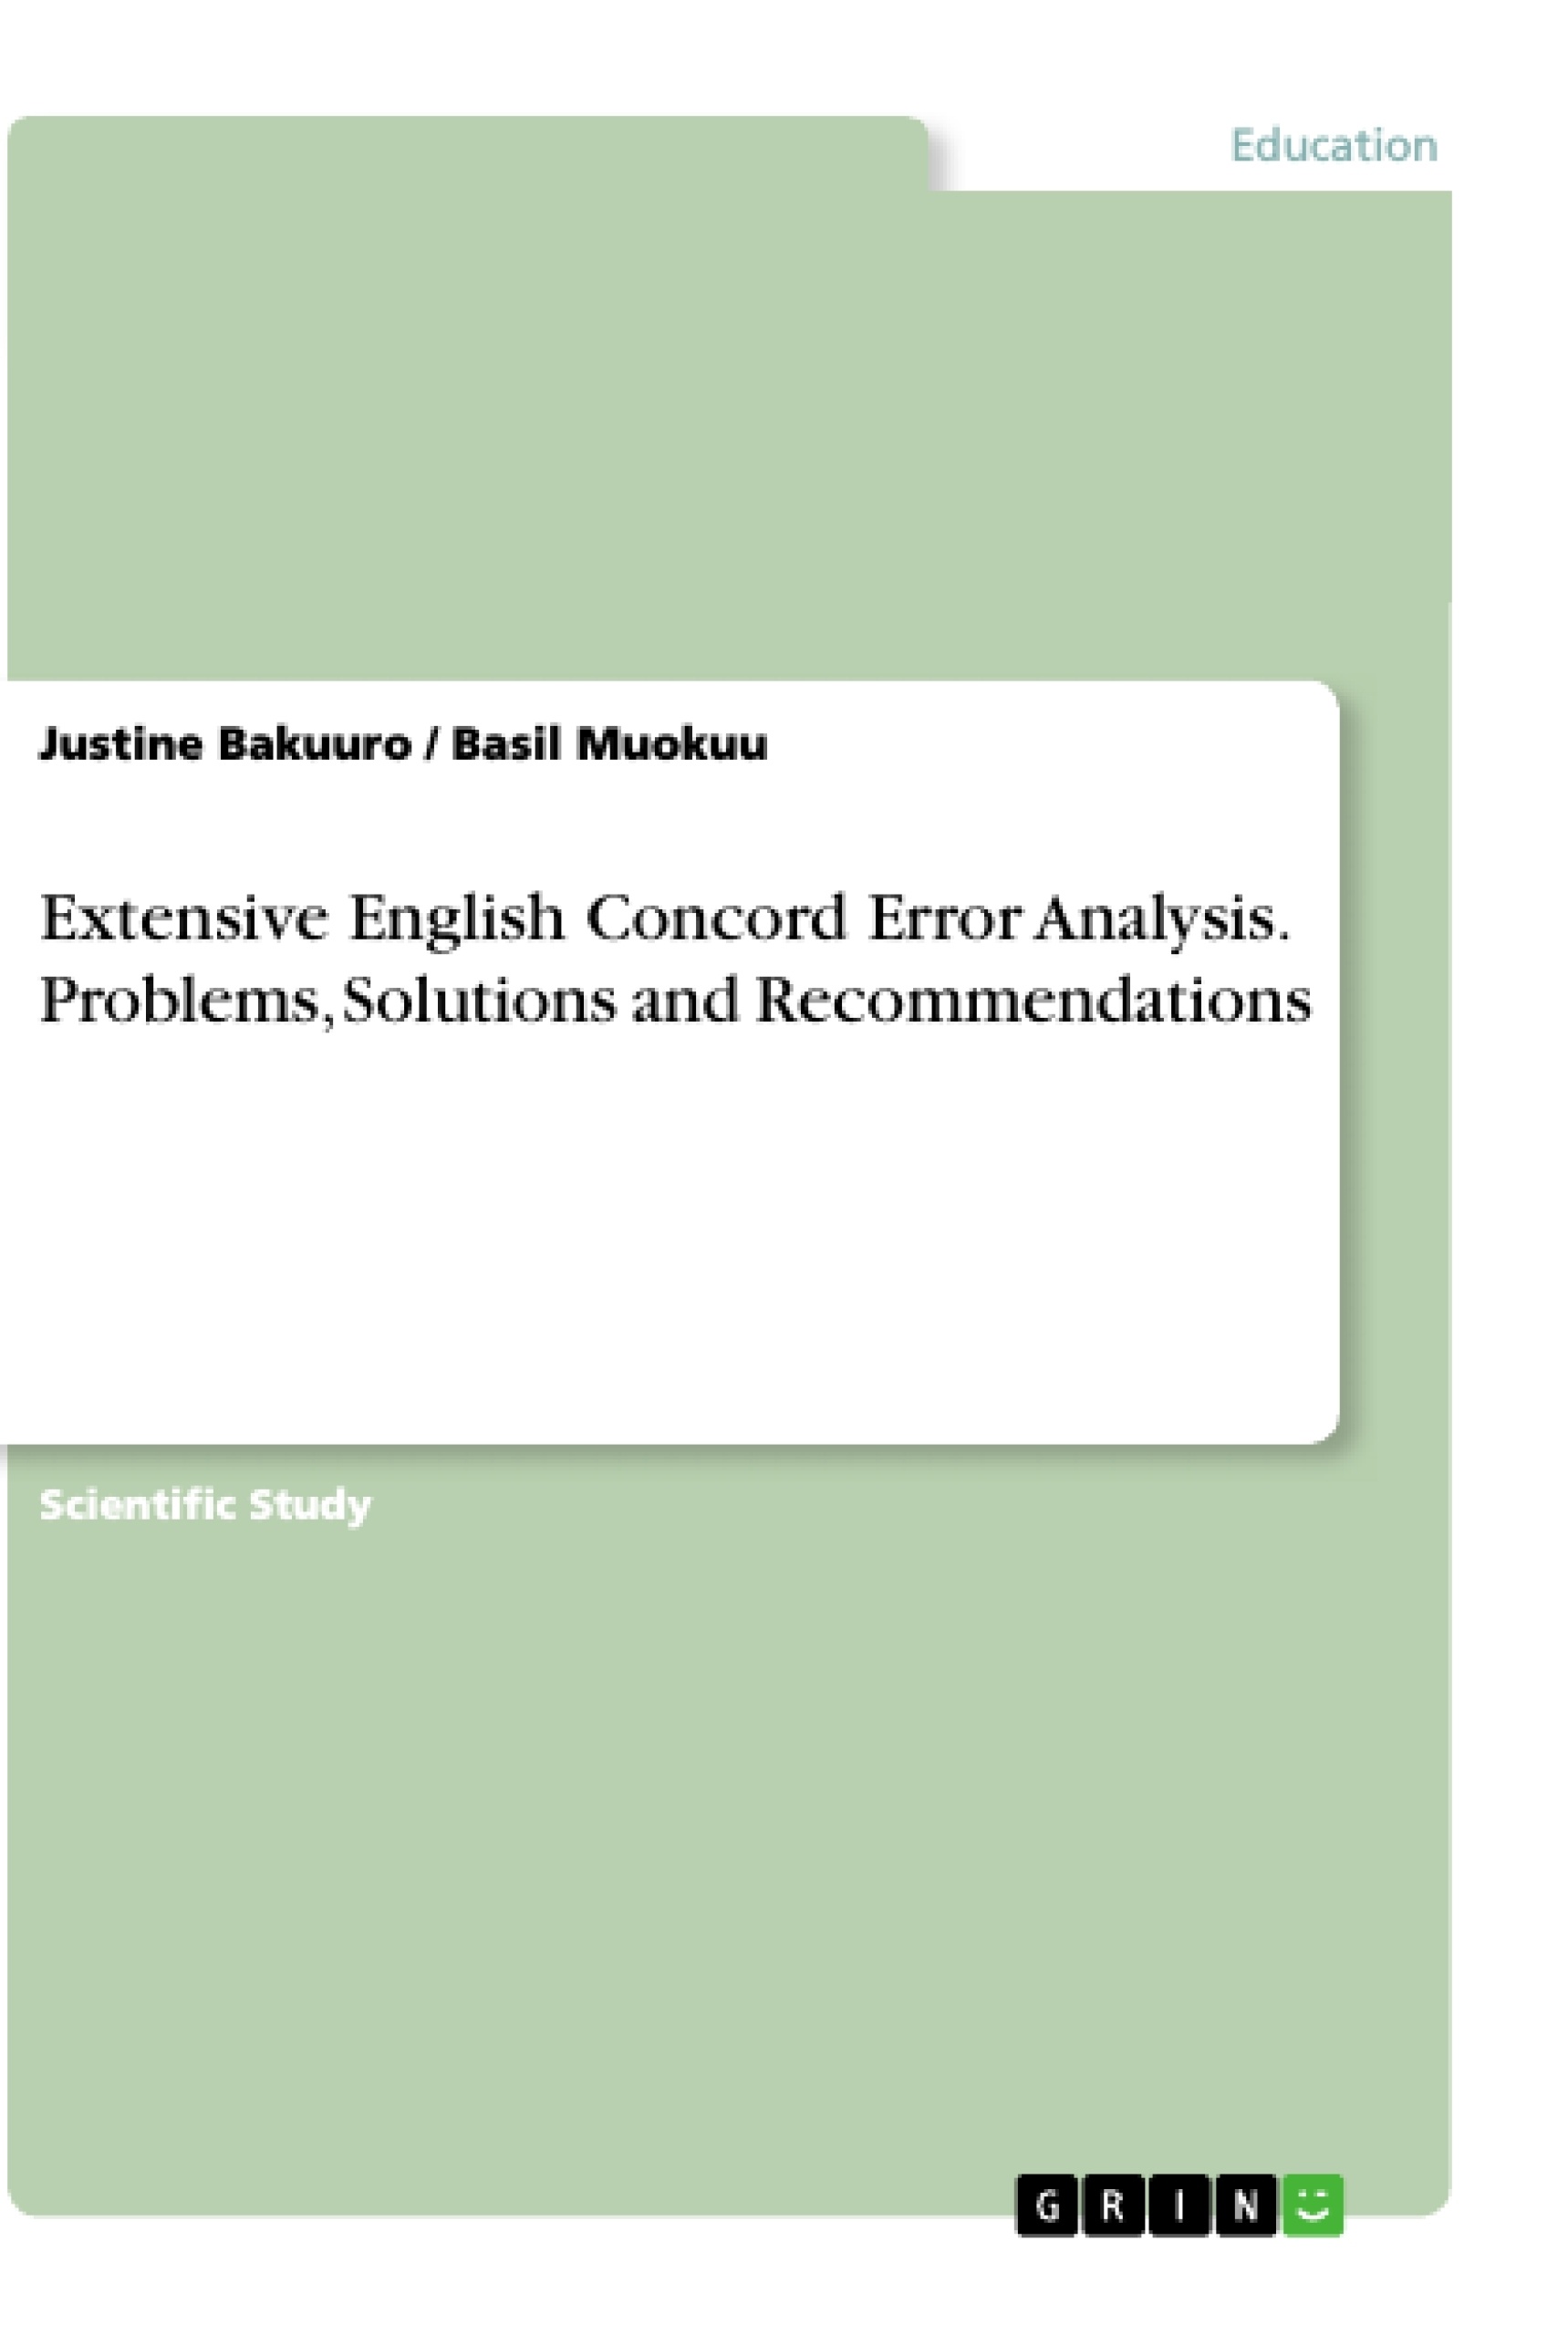 Título: Extensive English Concord Error Analysis. Problems, Solutions and Recommendations